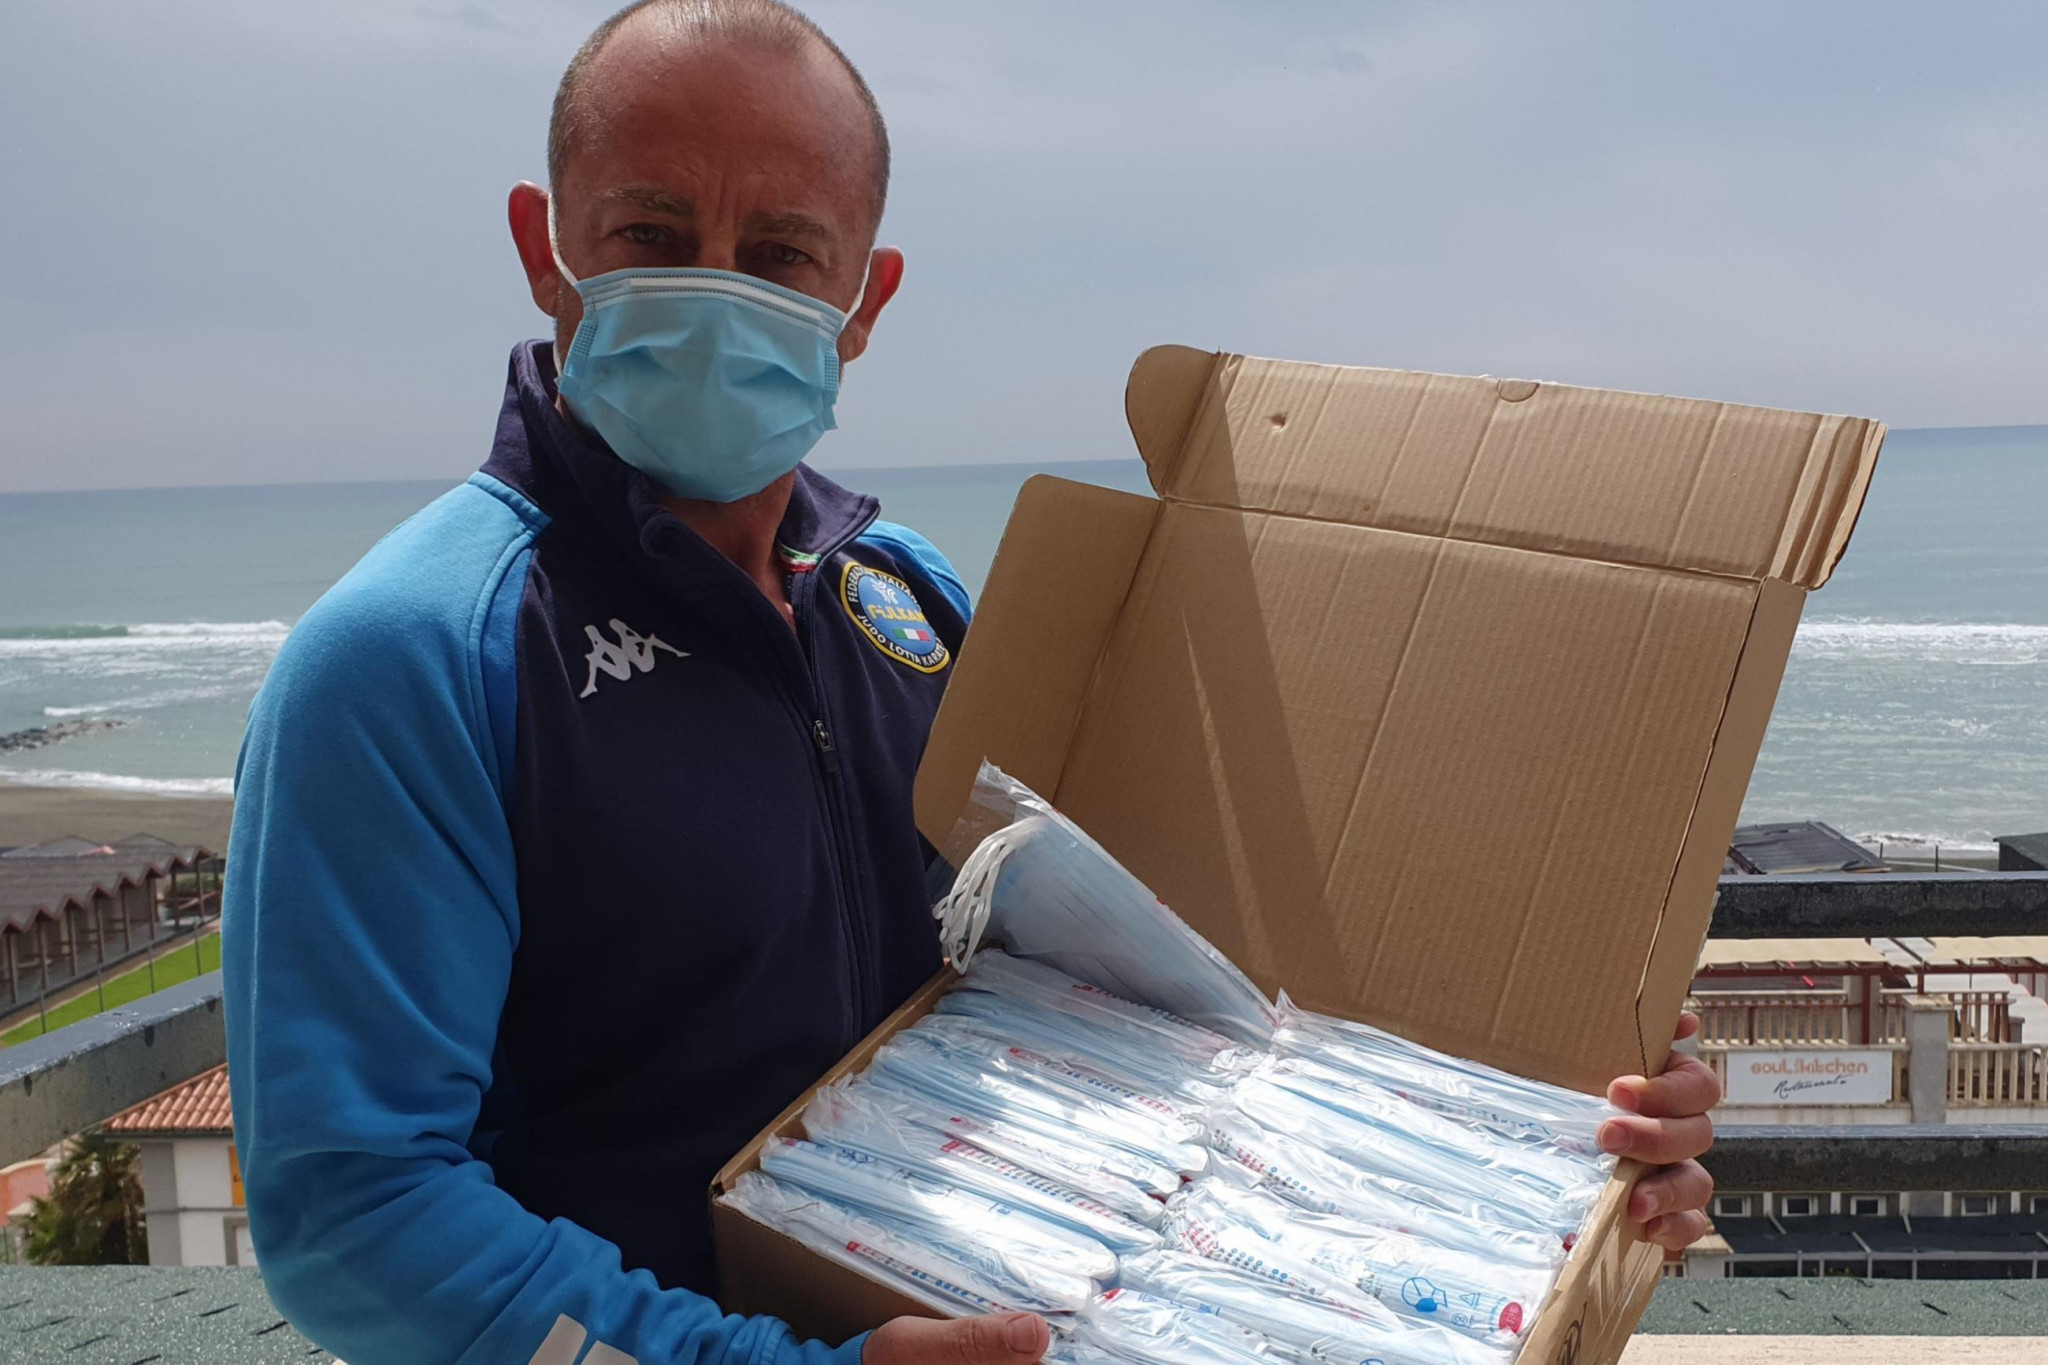 UWW and Chinese Wrestling Federation deliver masks to countries battling COVID-19